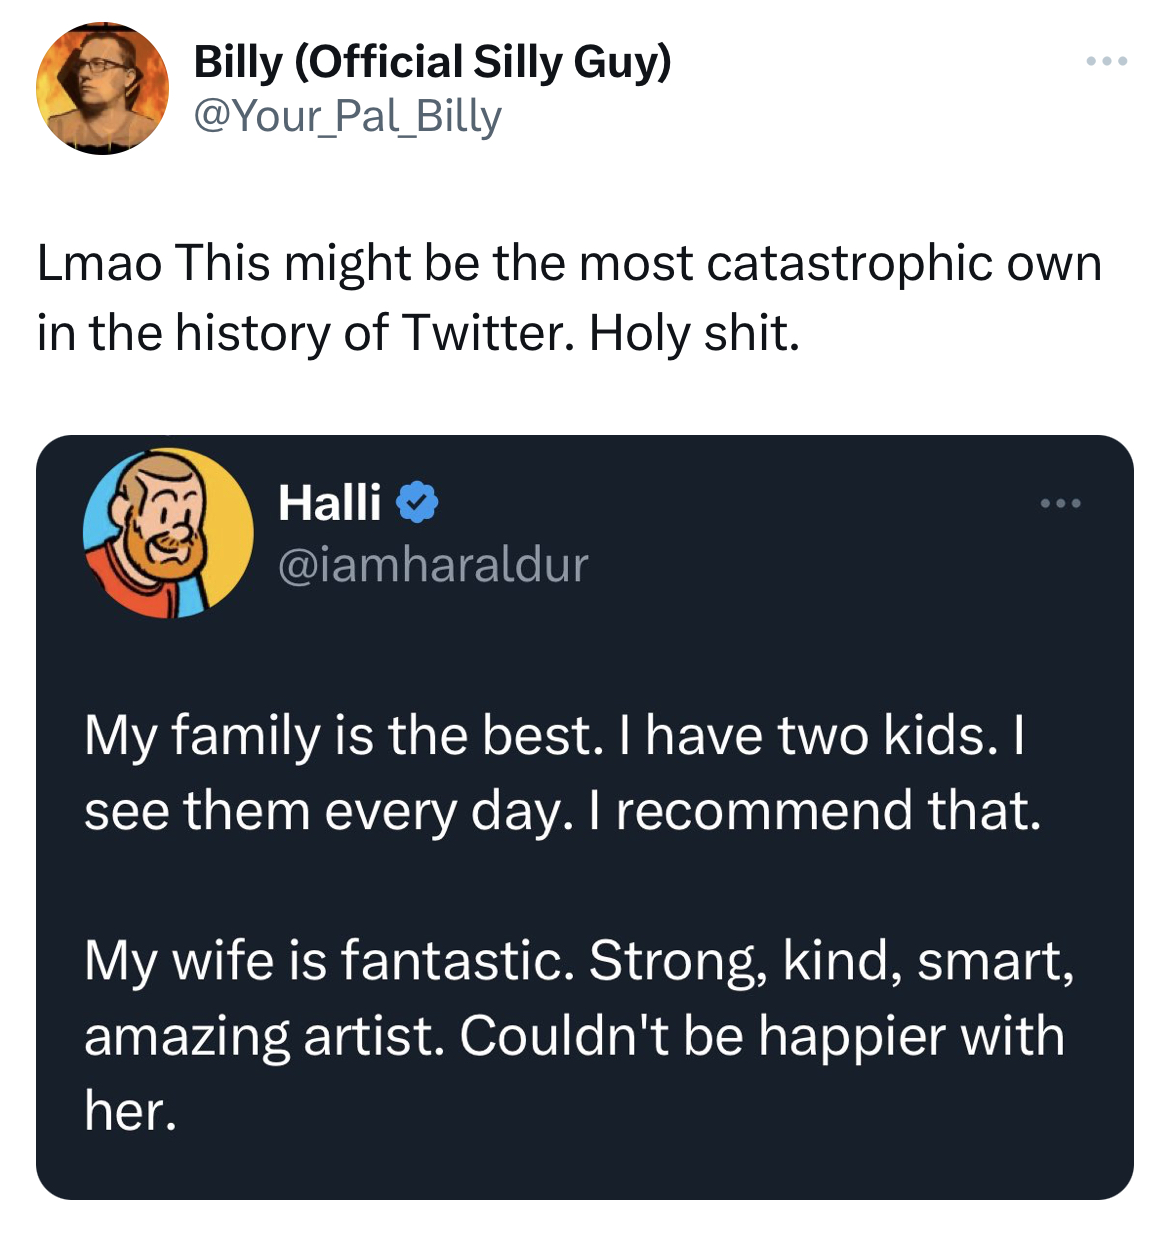 savage and funny tweets -software - Billy Official Silly Guy Pal_Billy Lmao This might be the most catastrophic own in the history of Twitter. Holy shit. Halli My family is the best. I have two kids. I see them every day. I recommend that. My wife is fant